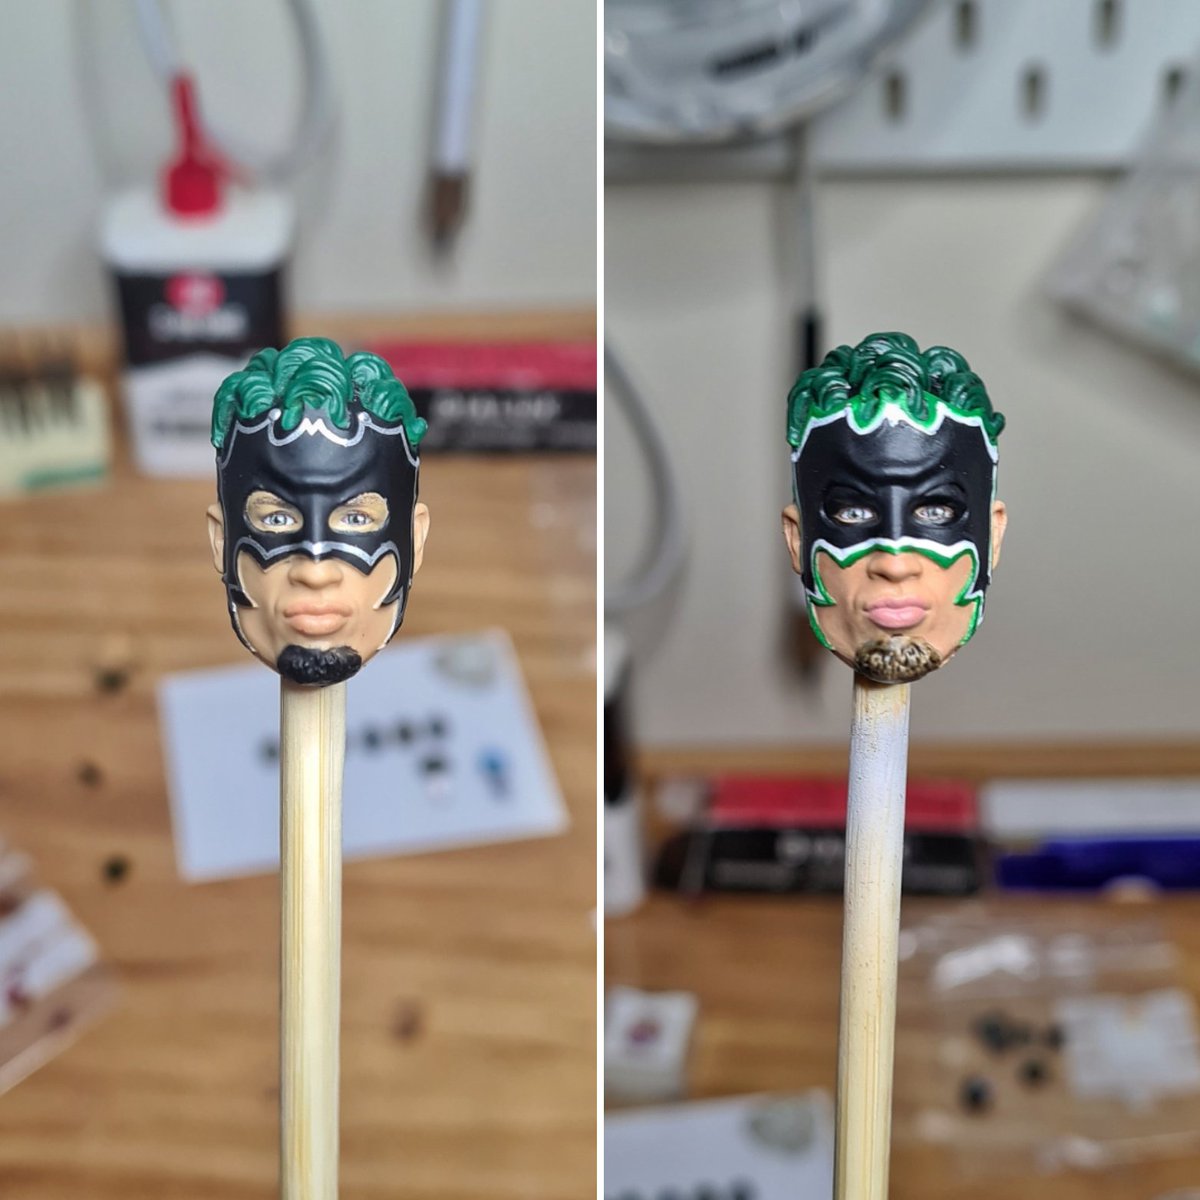 Just a before and after of the @ShaneHelmsCom custom I'm currently working on.